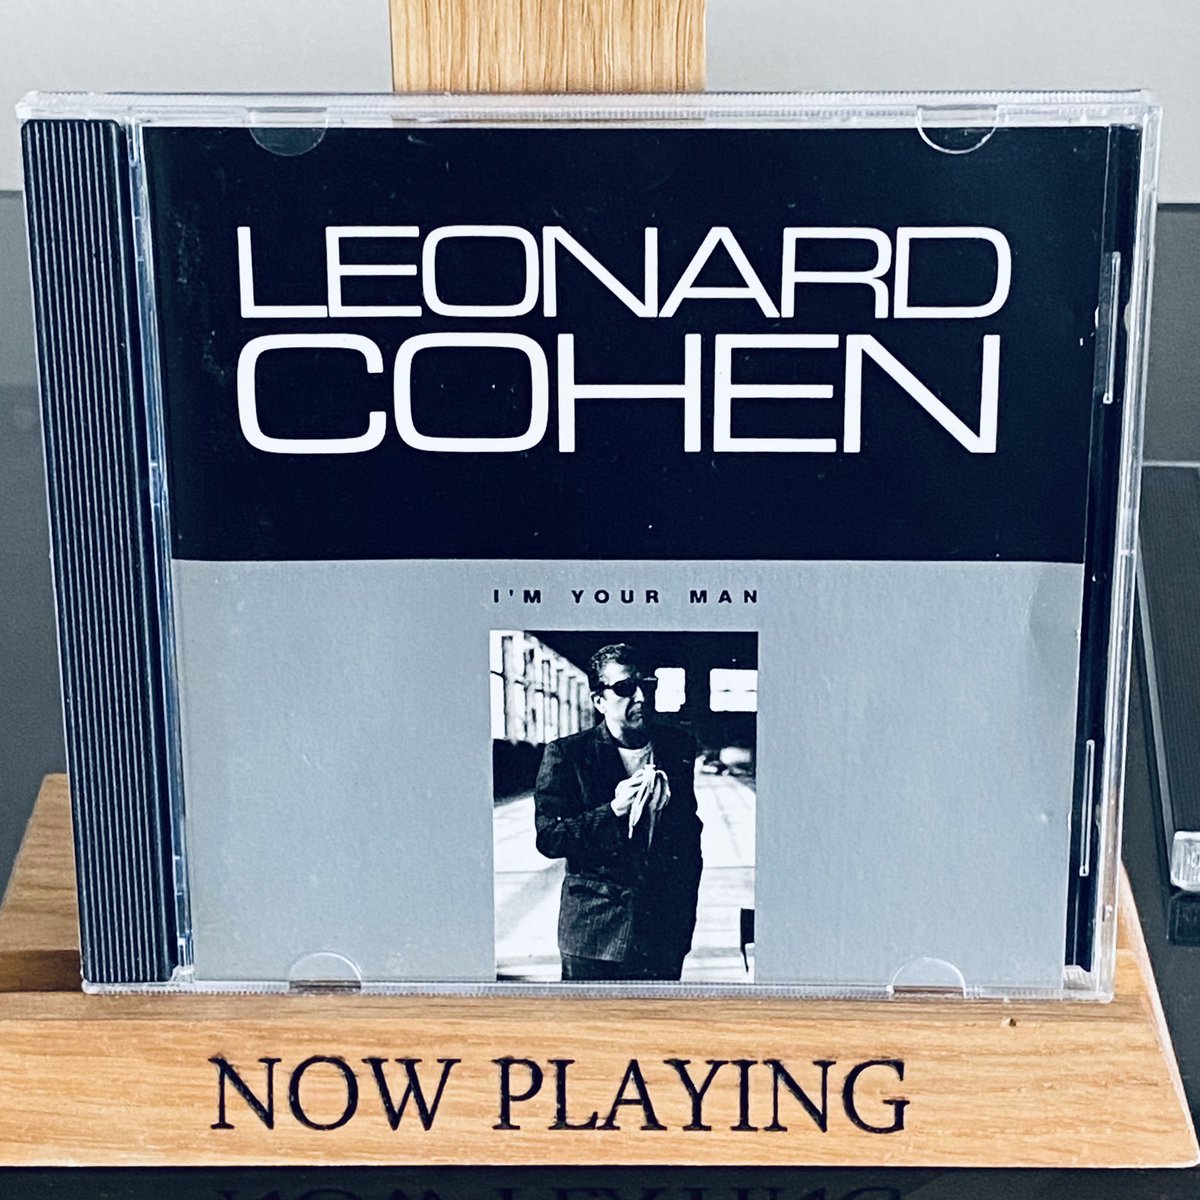 Listening to Leonard Cohen His eighth album from 1988 “I’m your Man” An ultramodern jump in production for Cohen back then which strands the sound of the record firmly in the 80s, but the songs are fabulous and timeless